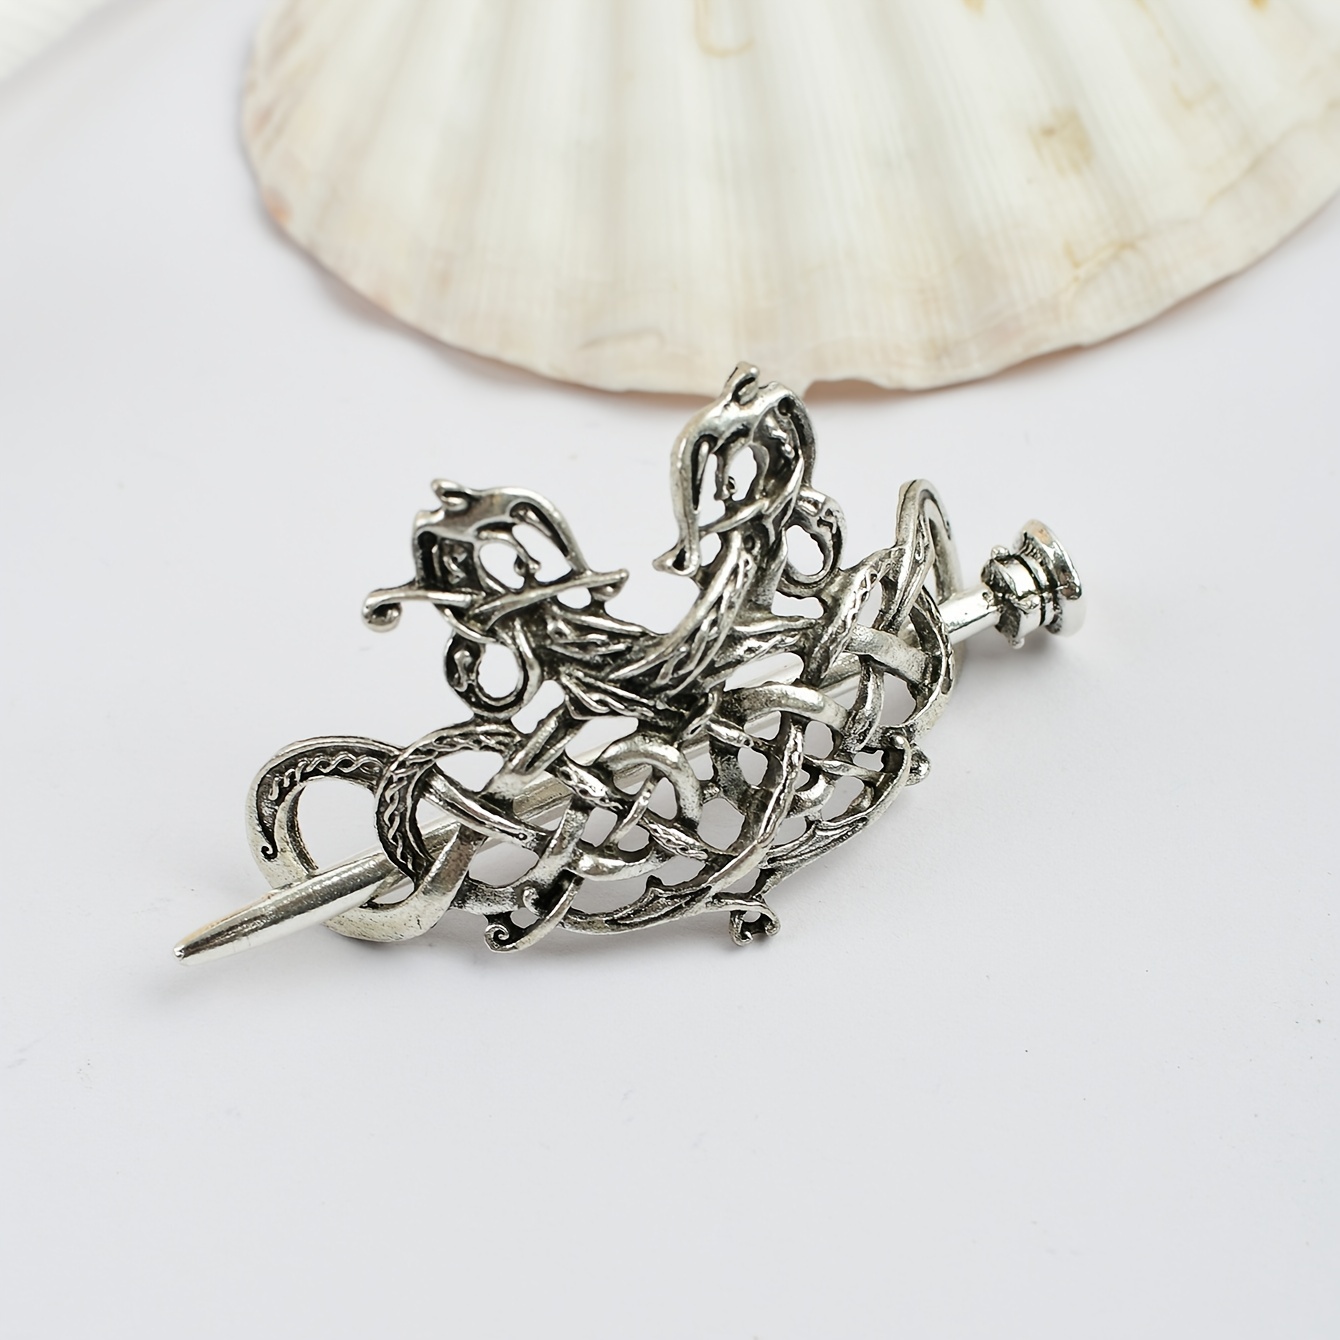 safety pin pendant, brooch,silver plate, antique silver, vintage